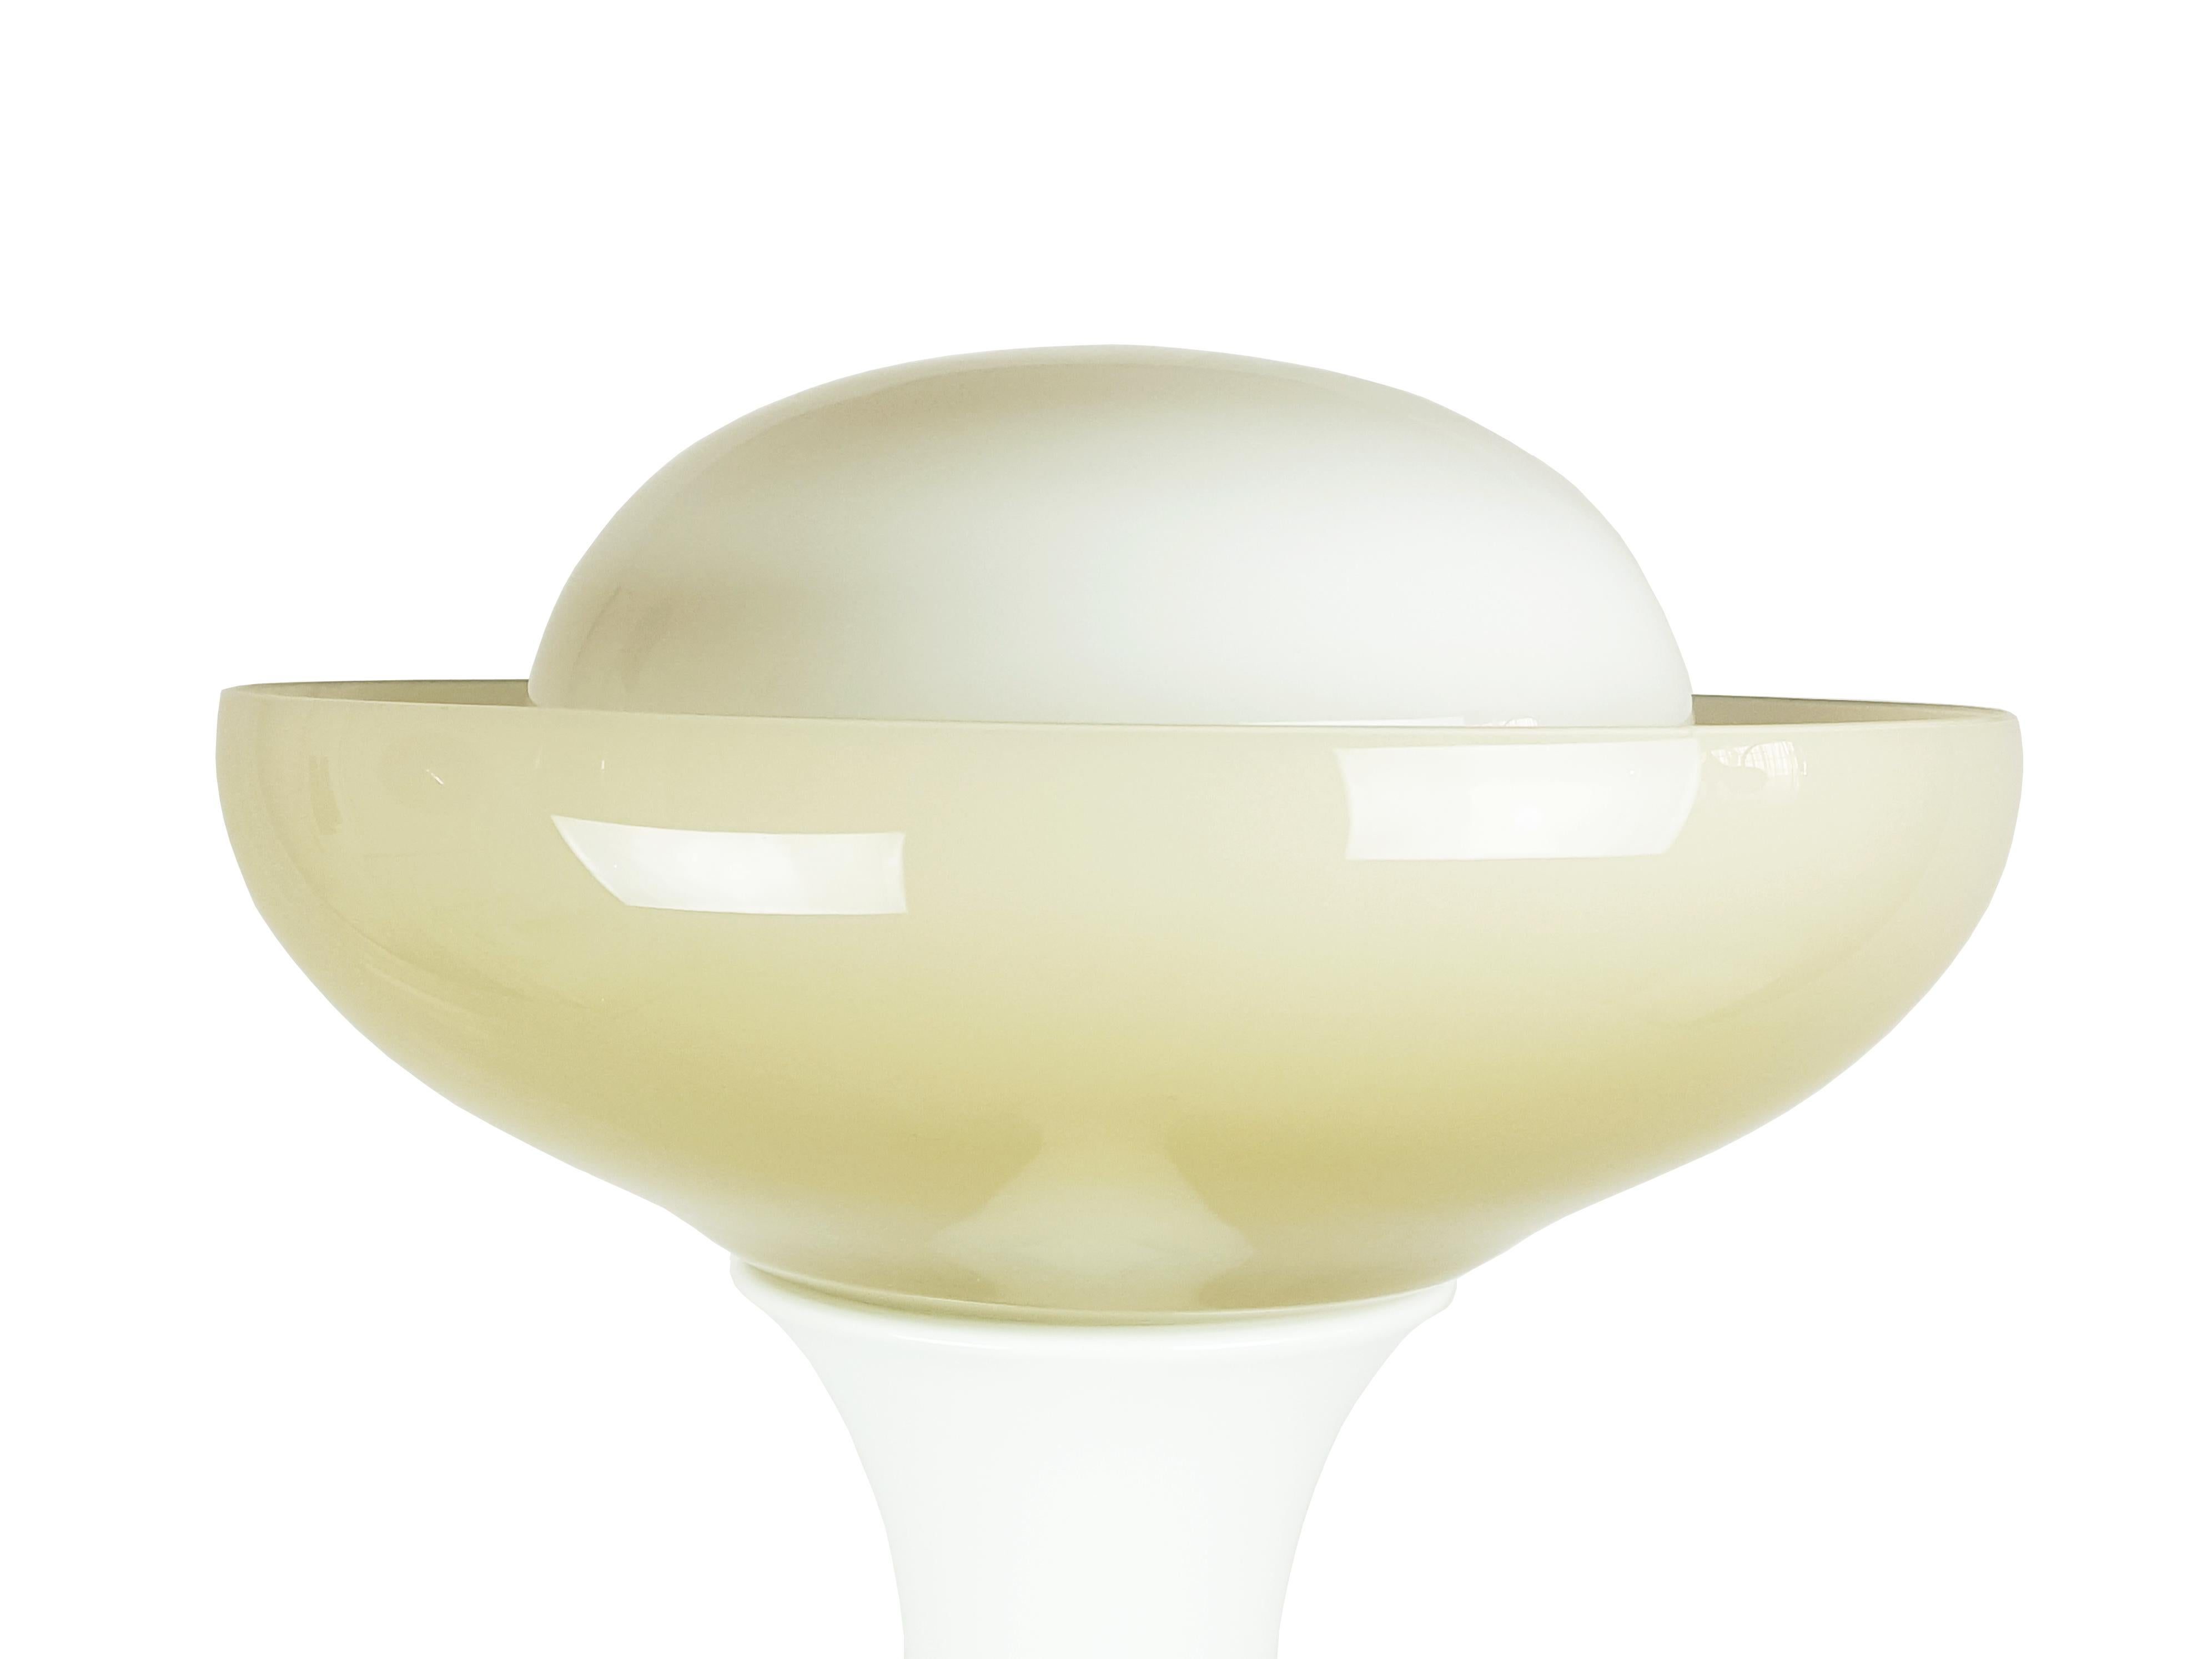 Space Age Olive Green and White Murano Glass Floor Lamp by Gino Vistosi for Vistosi, 1960s